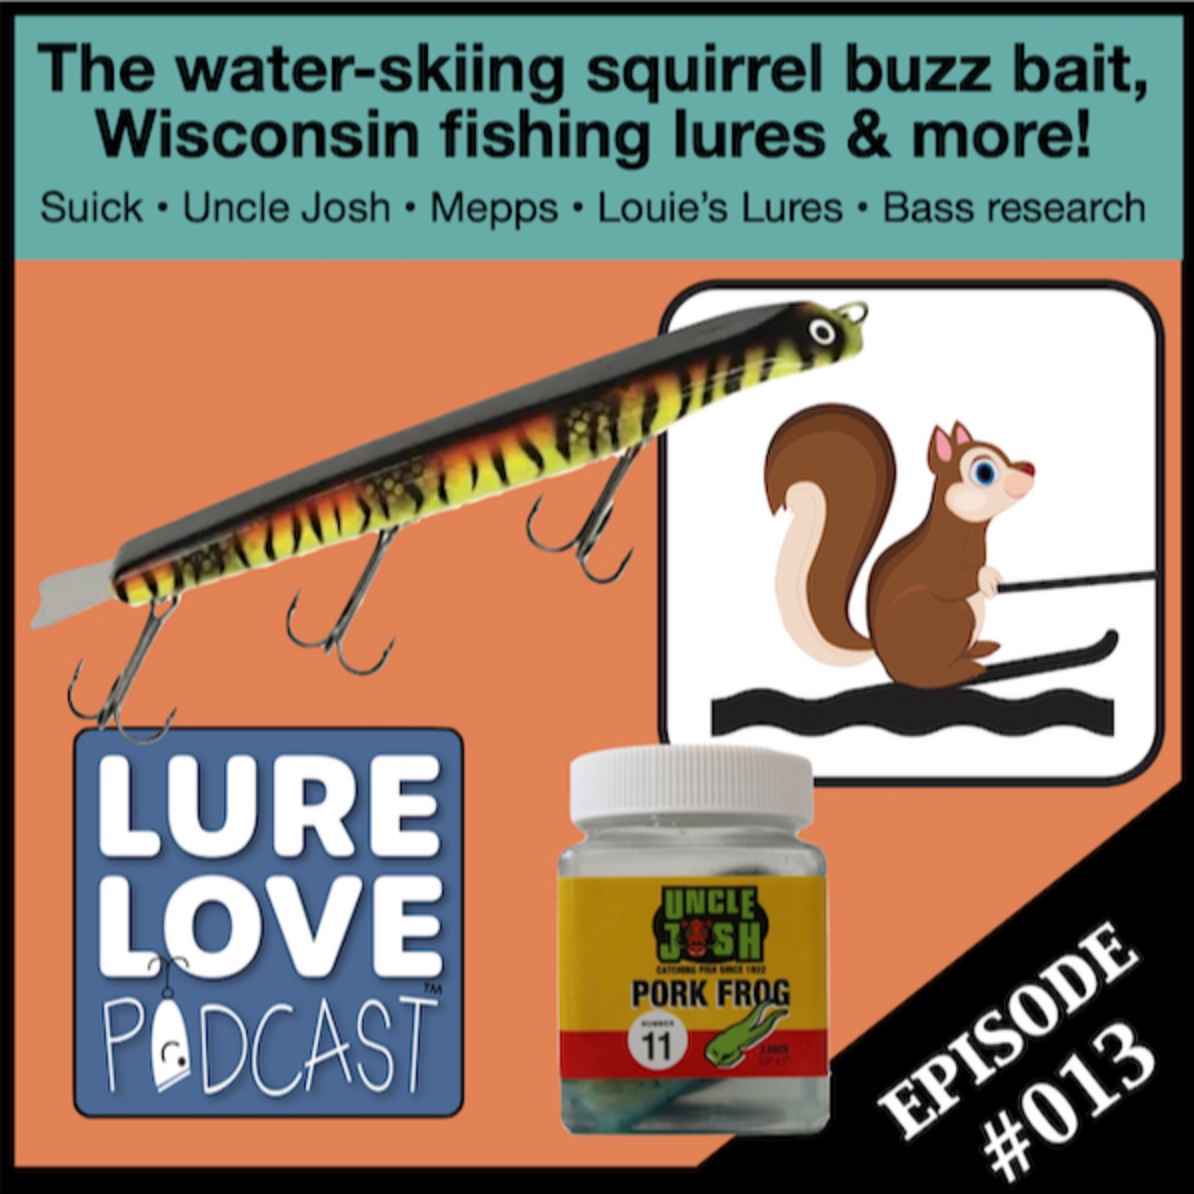 Water-skiing squirrel buzz baits, Wisconsin fishing lures & lure research updates